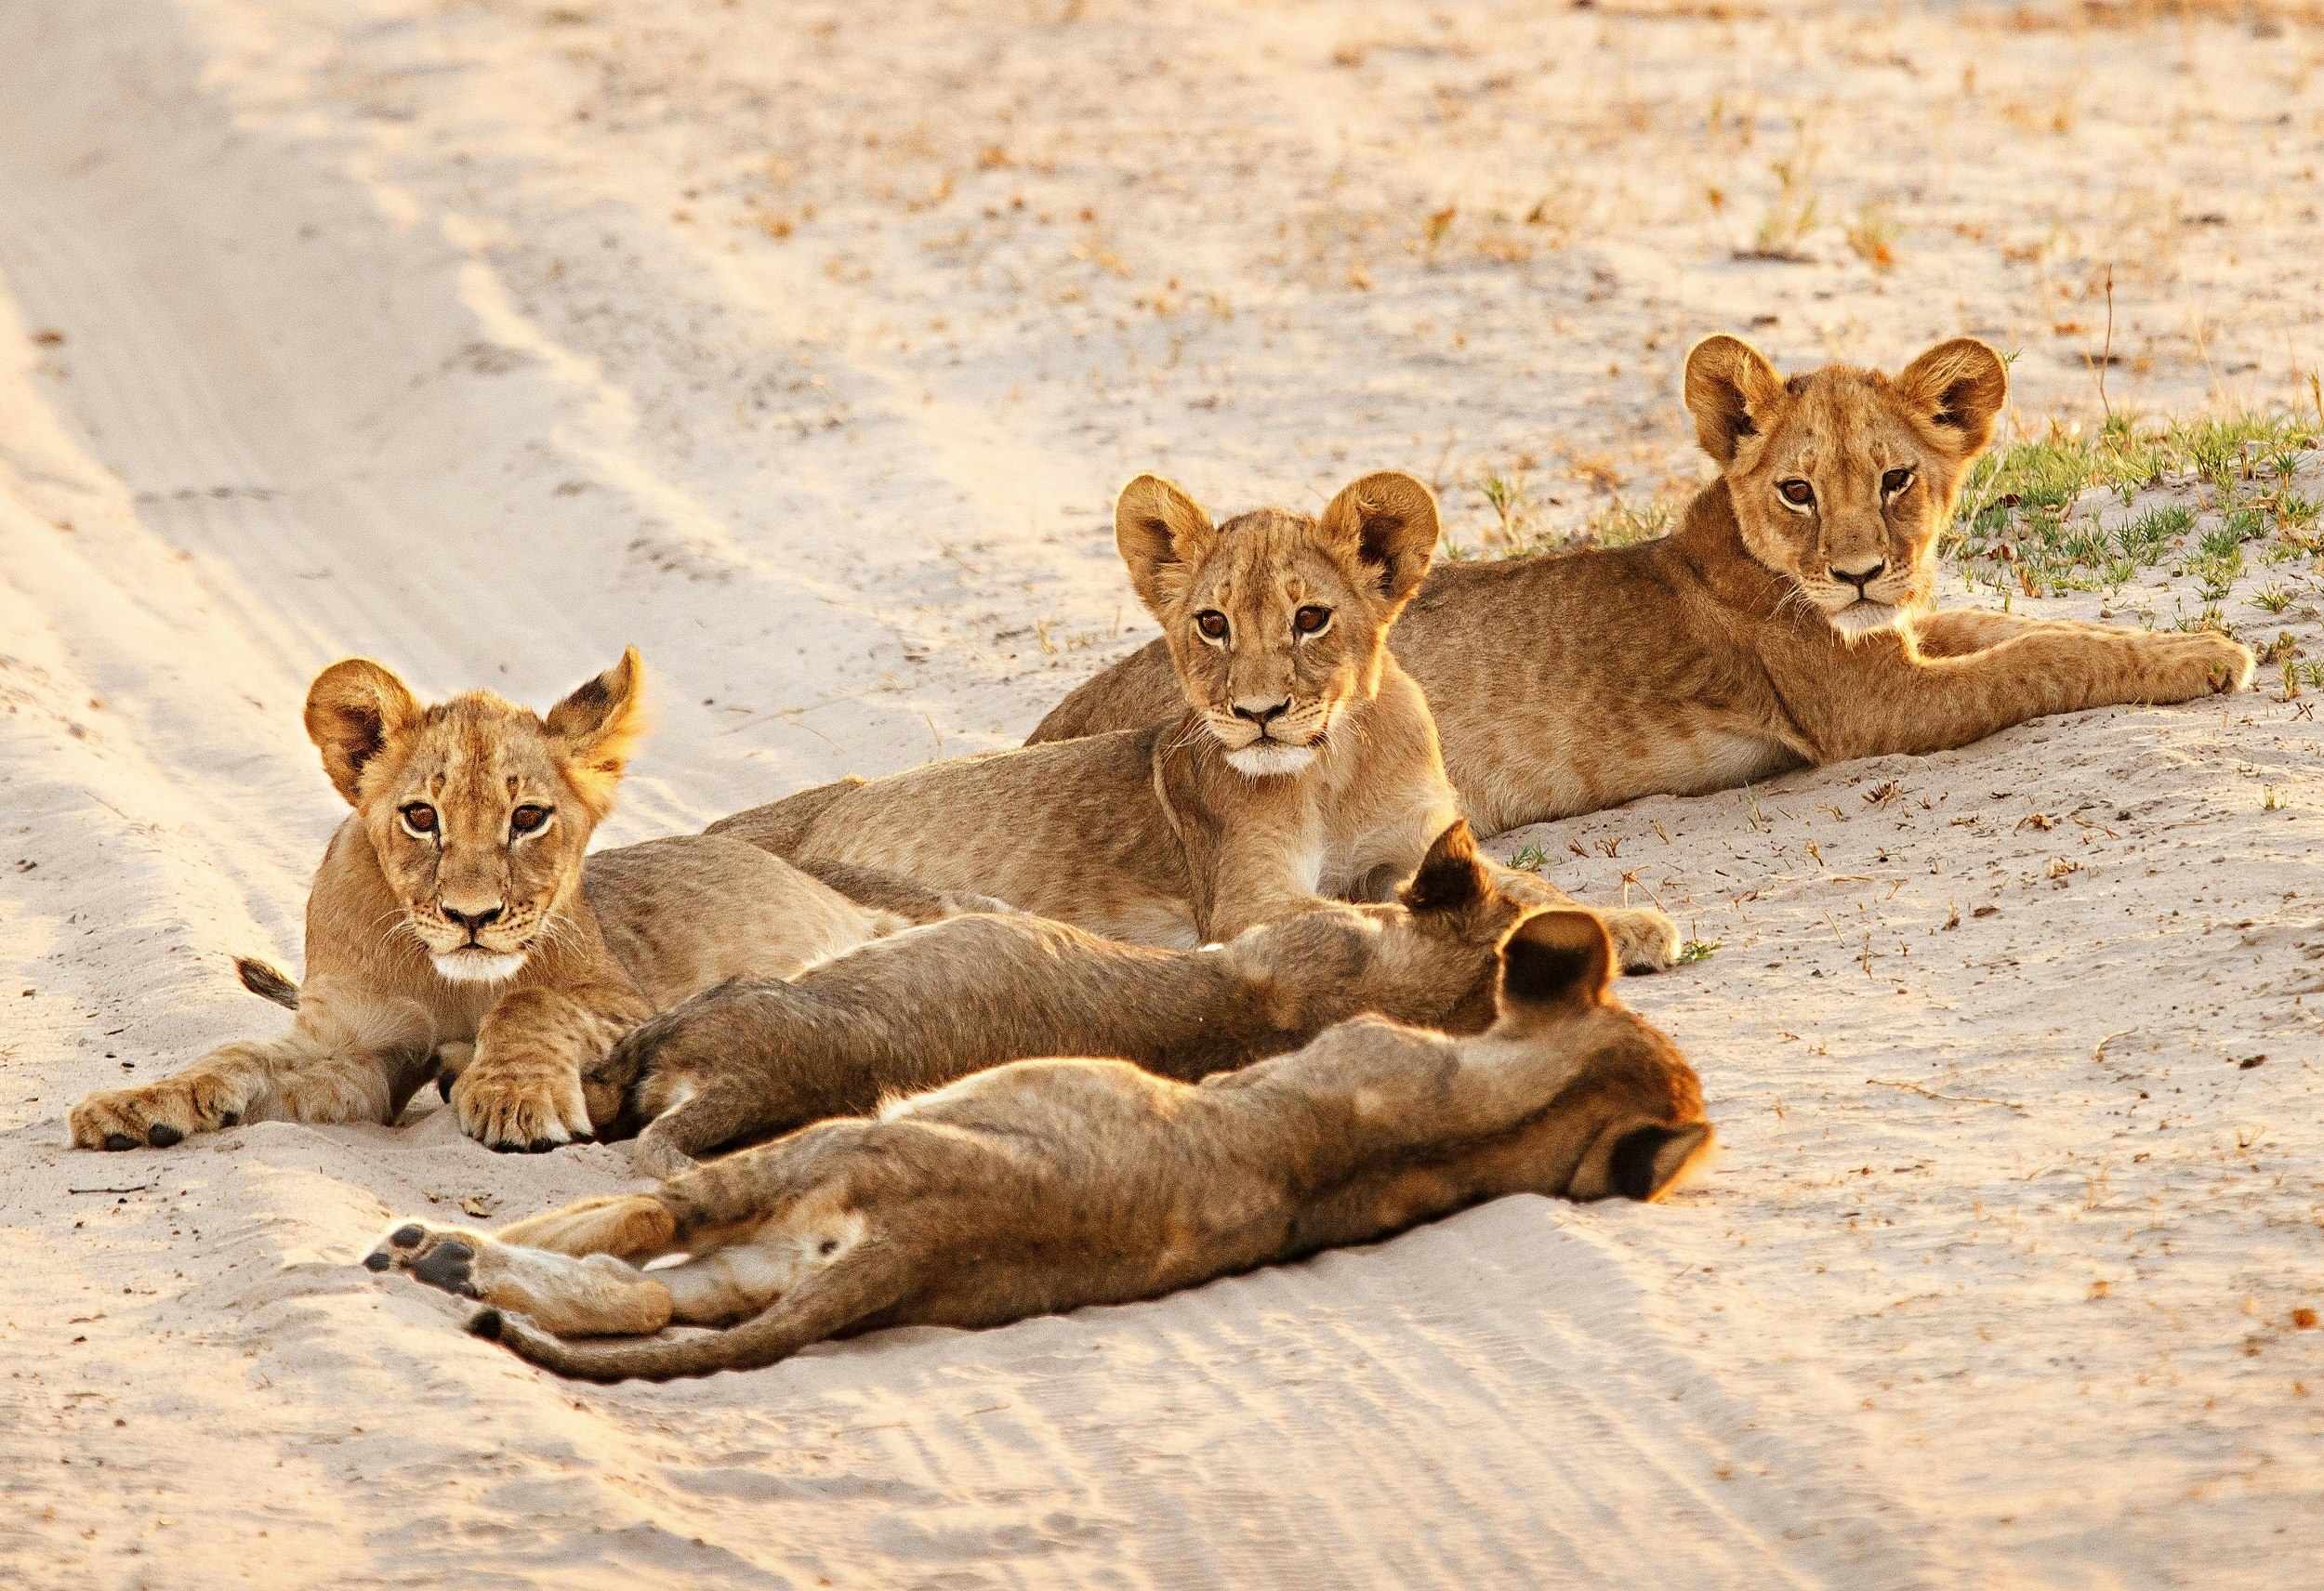 Five lion cubs lay on a sandy vehicle track; three have their heads up and face the camera. Two have their backs to the camera and are asleep, with their heads down.